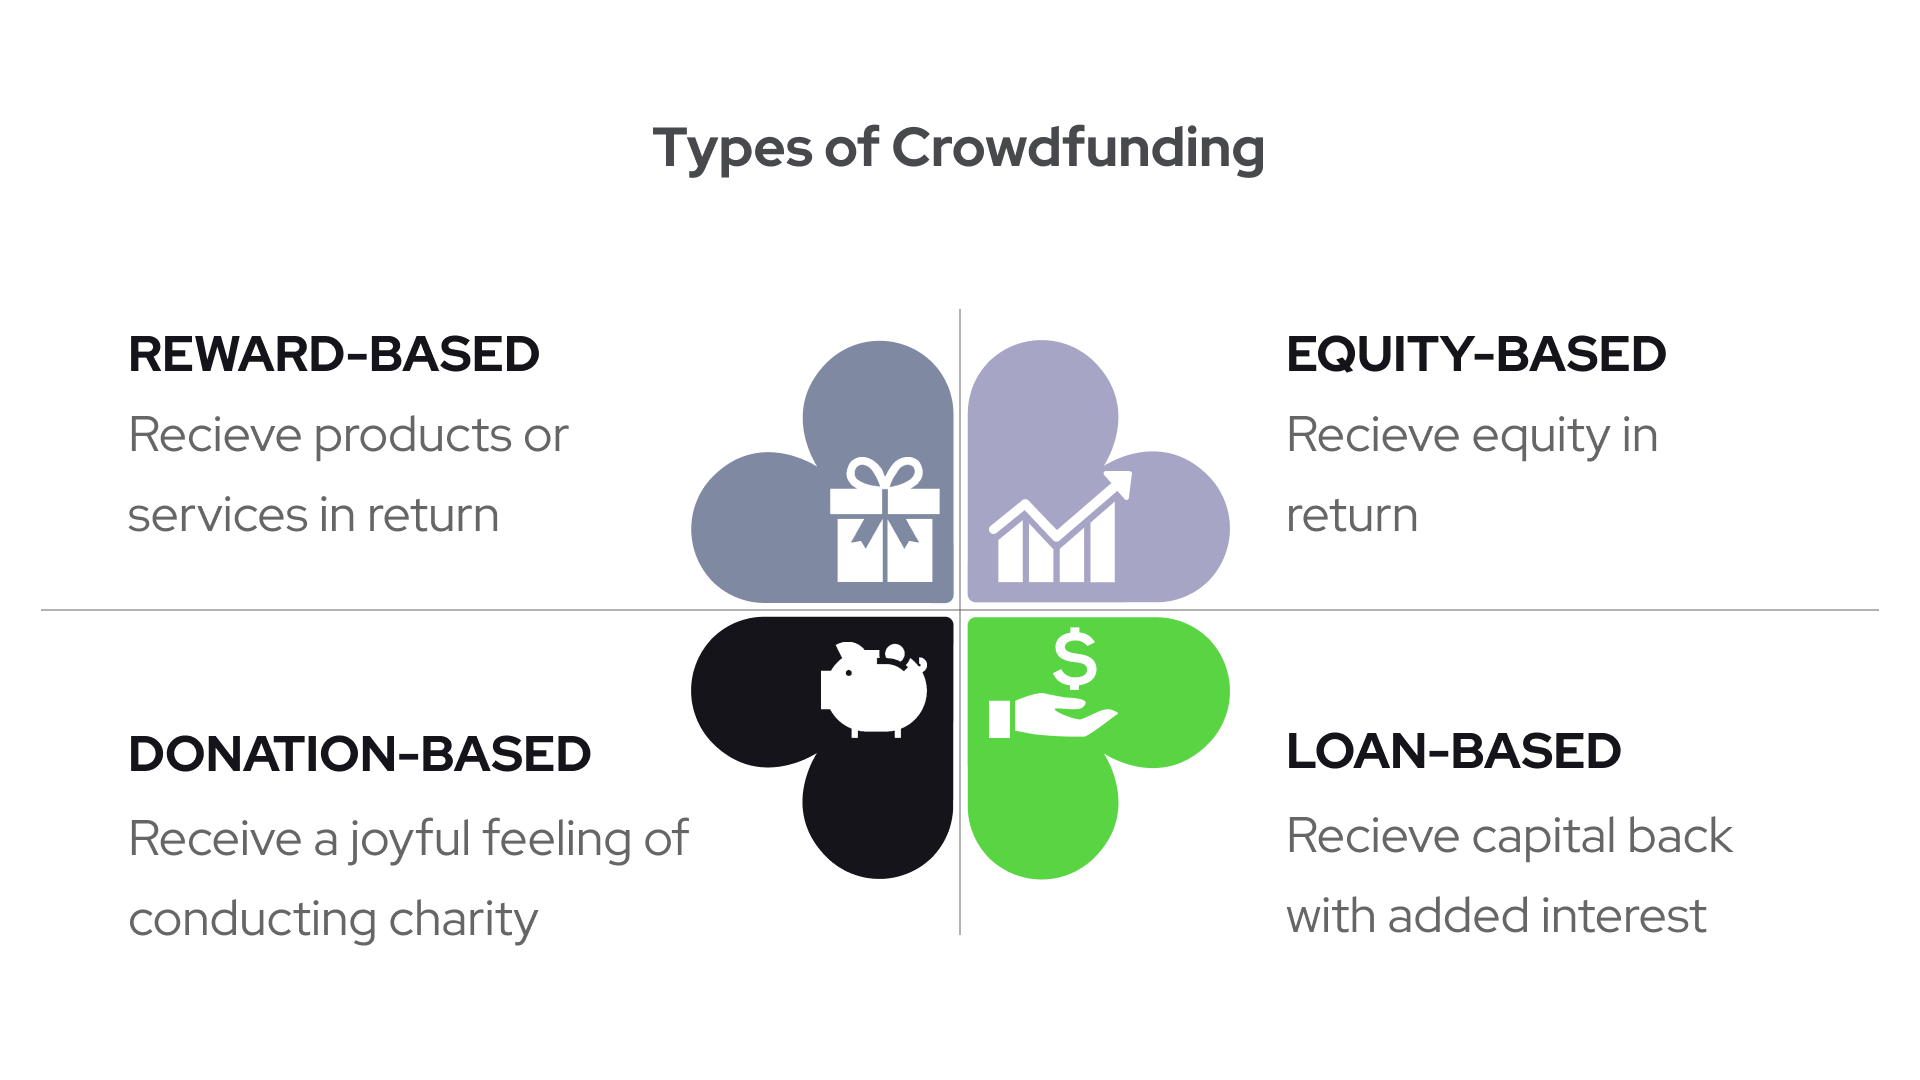 Crowdfunding app development sticks to the four main types: reward-based, equity-based, donation-based, and loan-based crowdfunding.